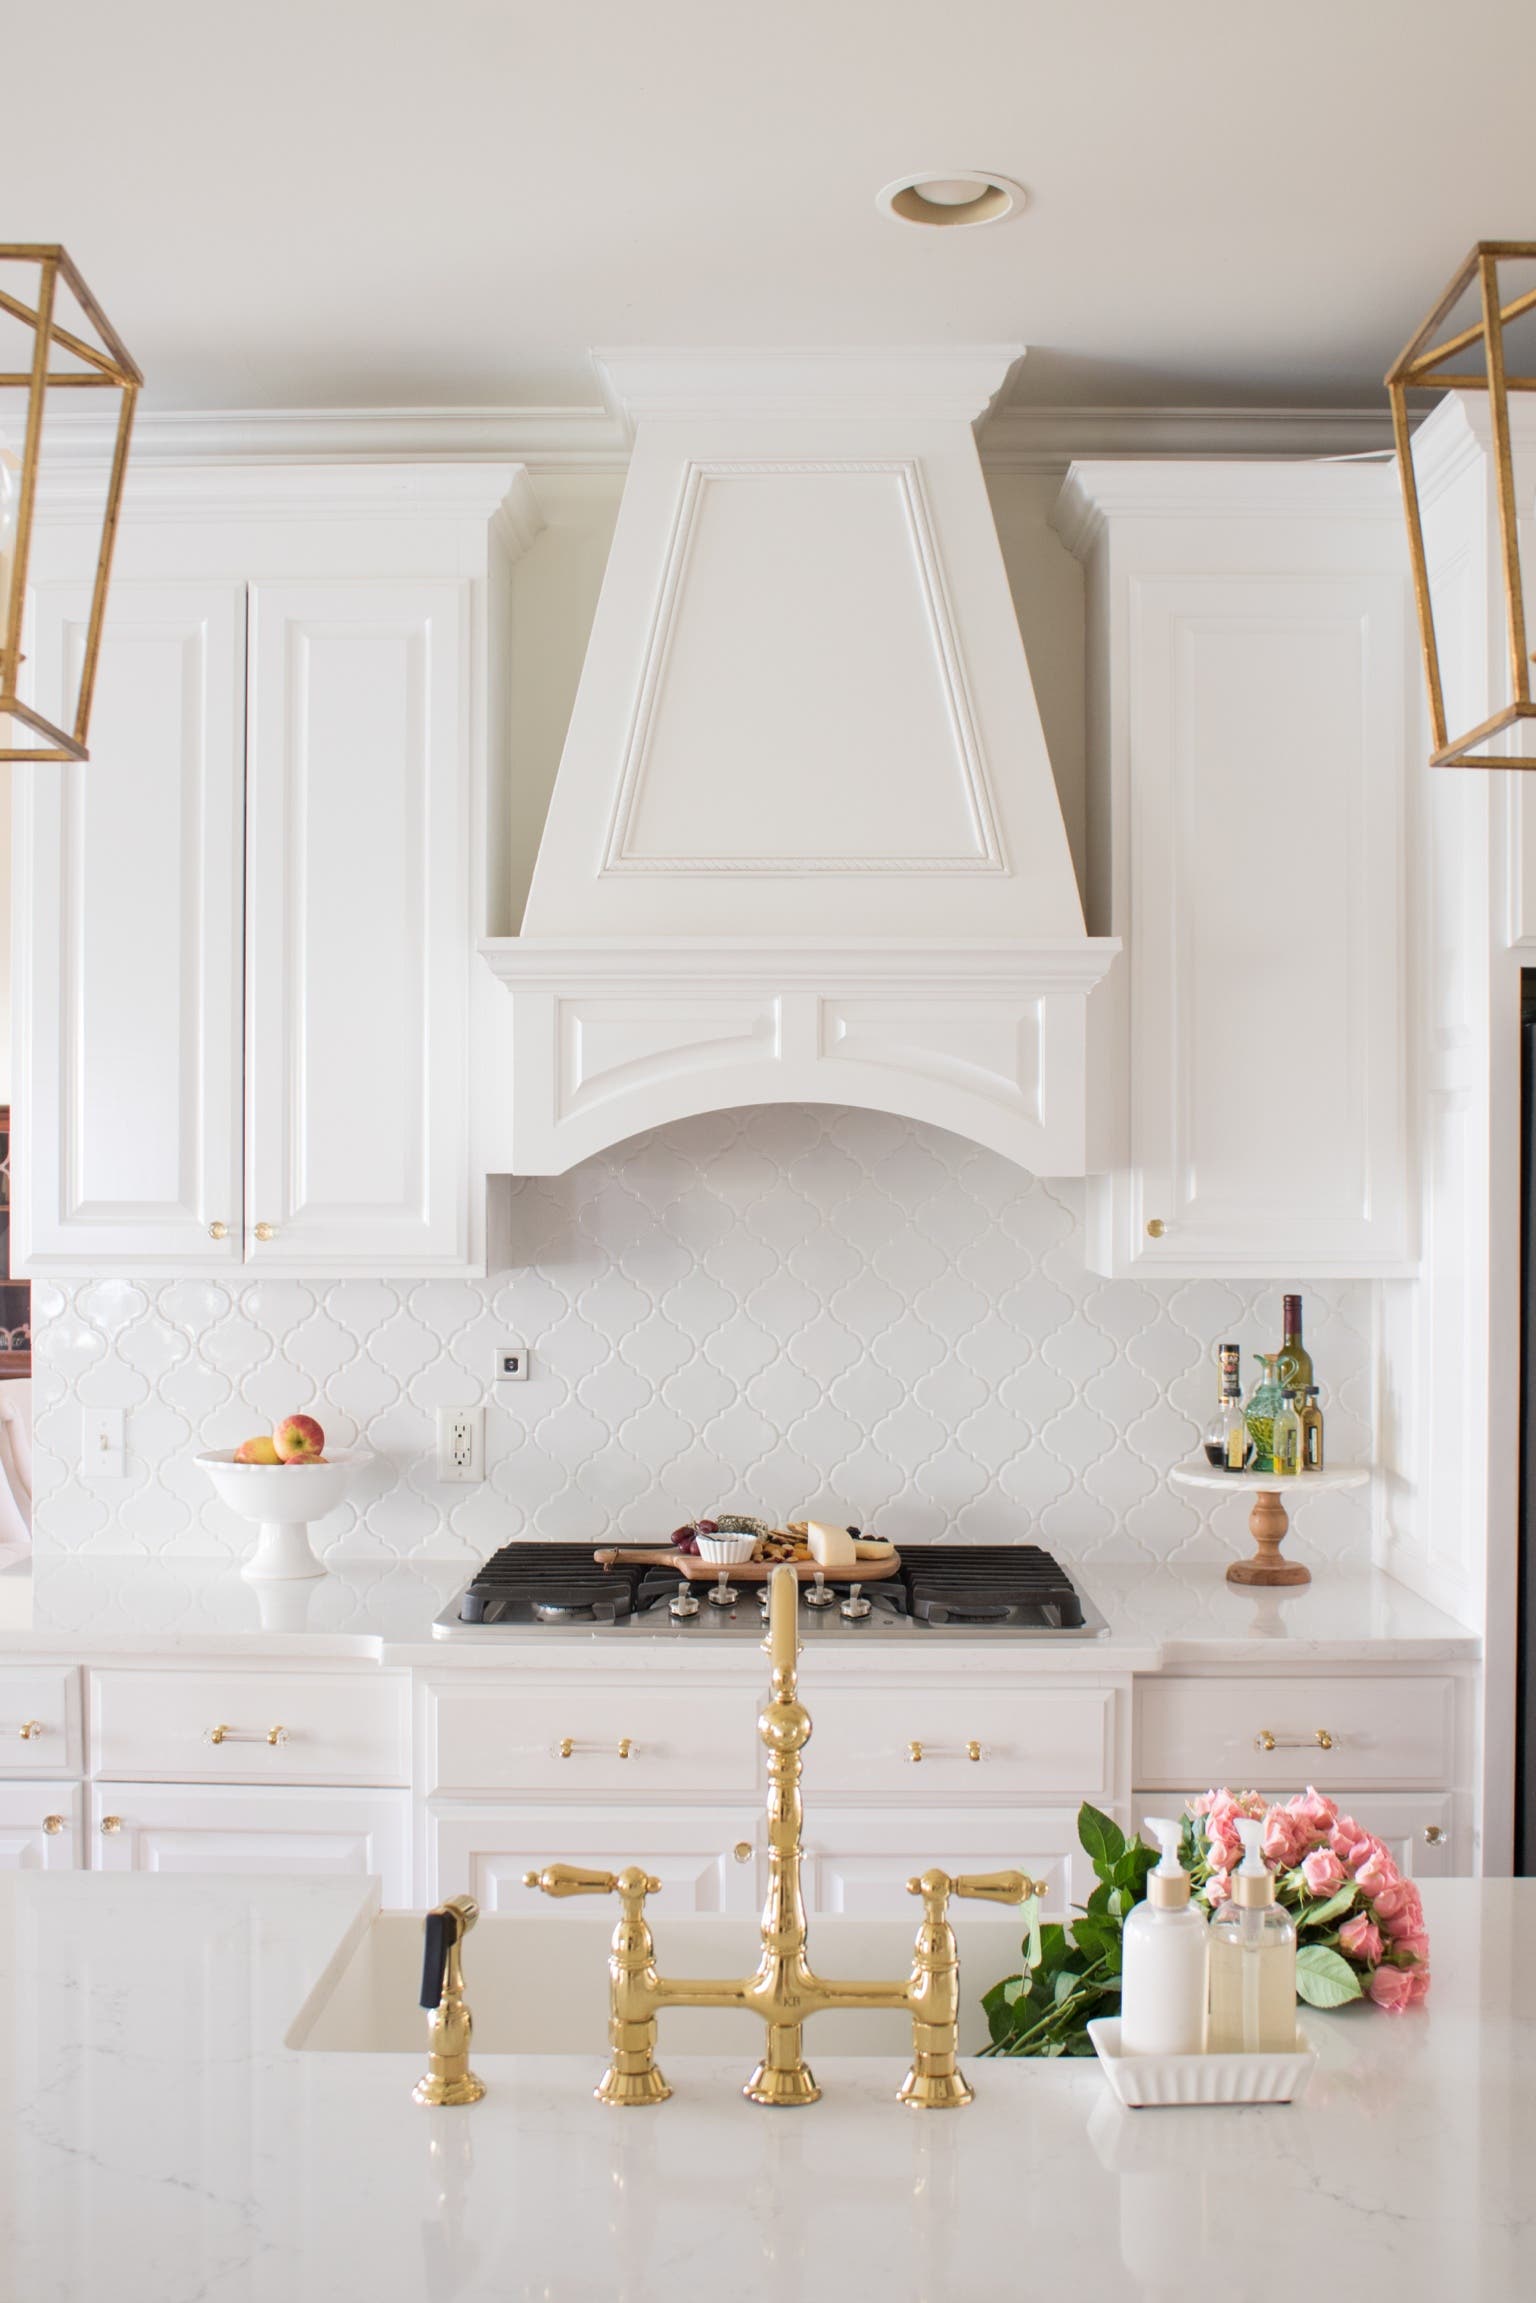 How to Choose Timeless Fixtures in the Kitchen